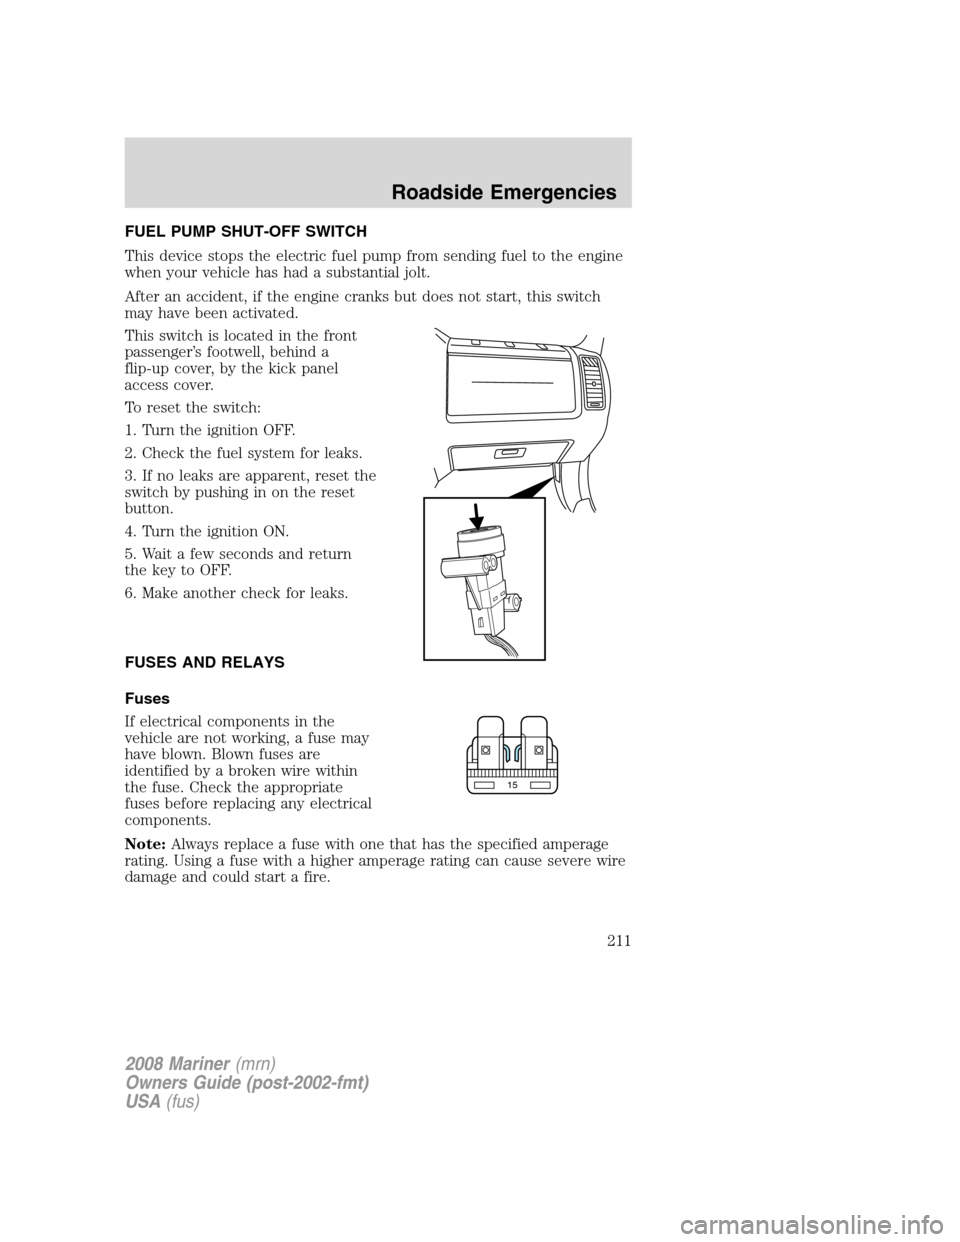 Mercury Mariner 2008  Owners Manuals FUEL PUMP SHUT-OFF SWITCH
This device stops the electric fuel pump from sending fuel to the engine
when your vehicle has had a substantial jolt.
After an accident, if the engine cranks but does not st